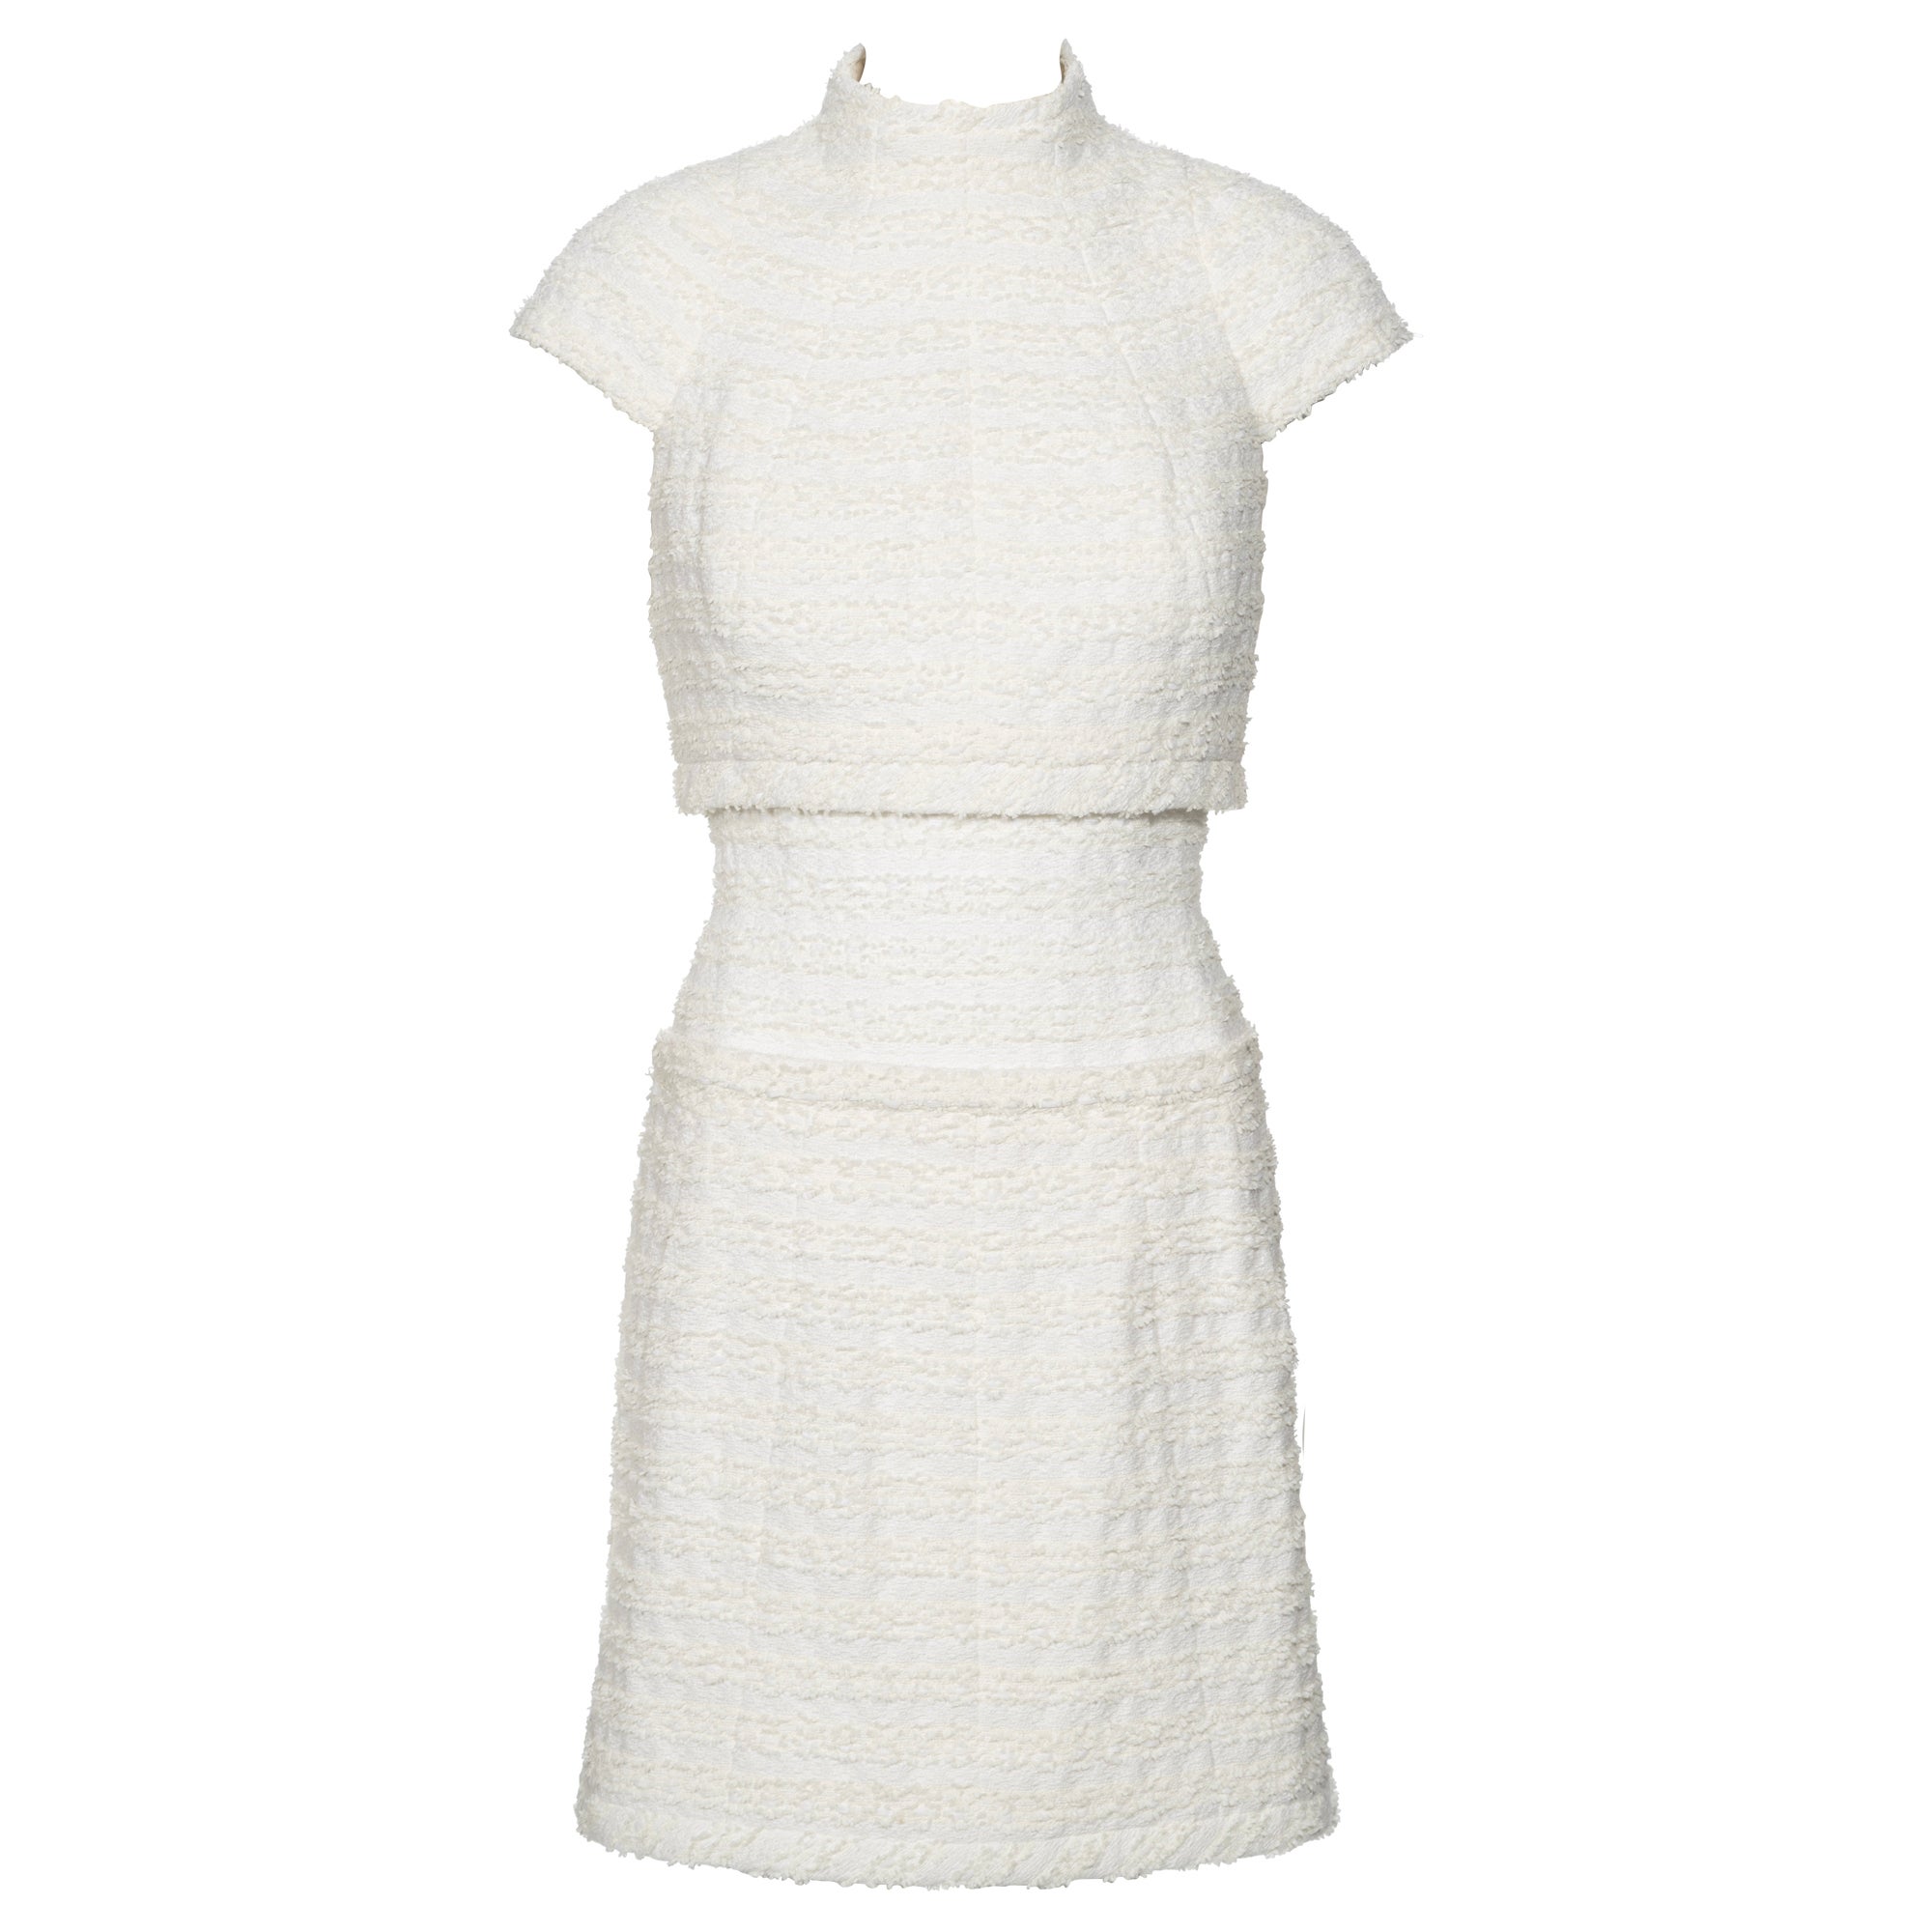 Chanel by Karl Lagerfeld Haute Couture White Bouclé Corseted Skirt Suit, ss 2014 For Sale